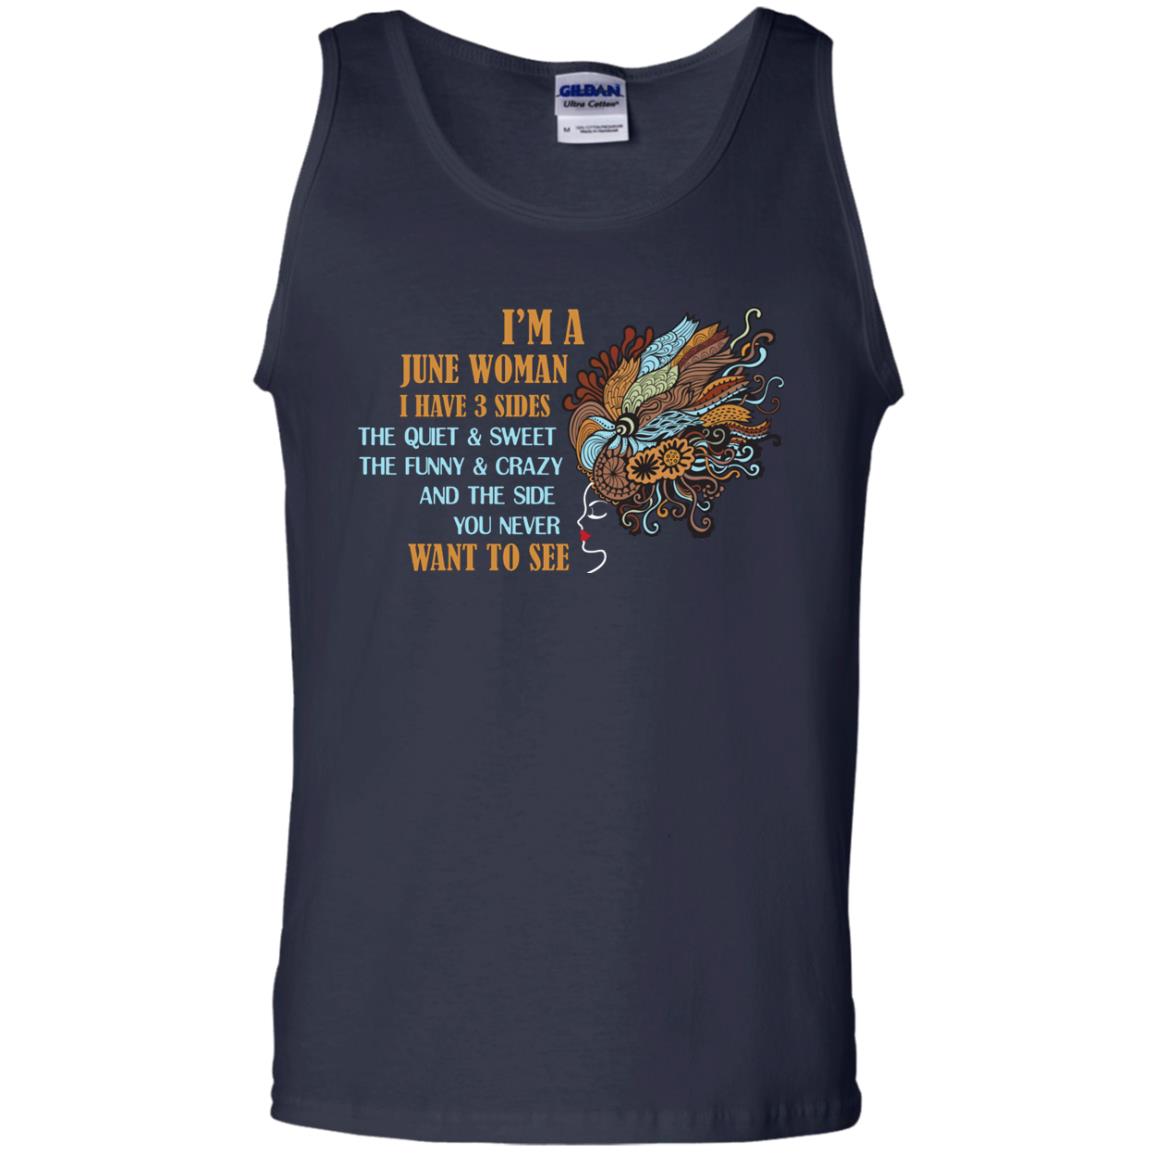 I'm A June Woman I Have 3 Sides The Quite And Sweet The Funny And Crazy And The Side You Never Want To SeeG220 Gildan 100% Cotton Tank Top